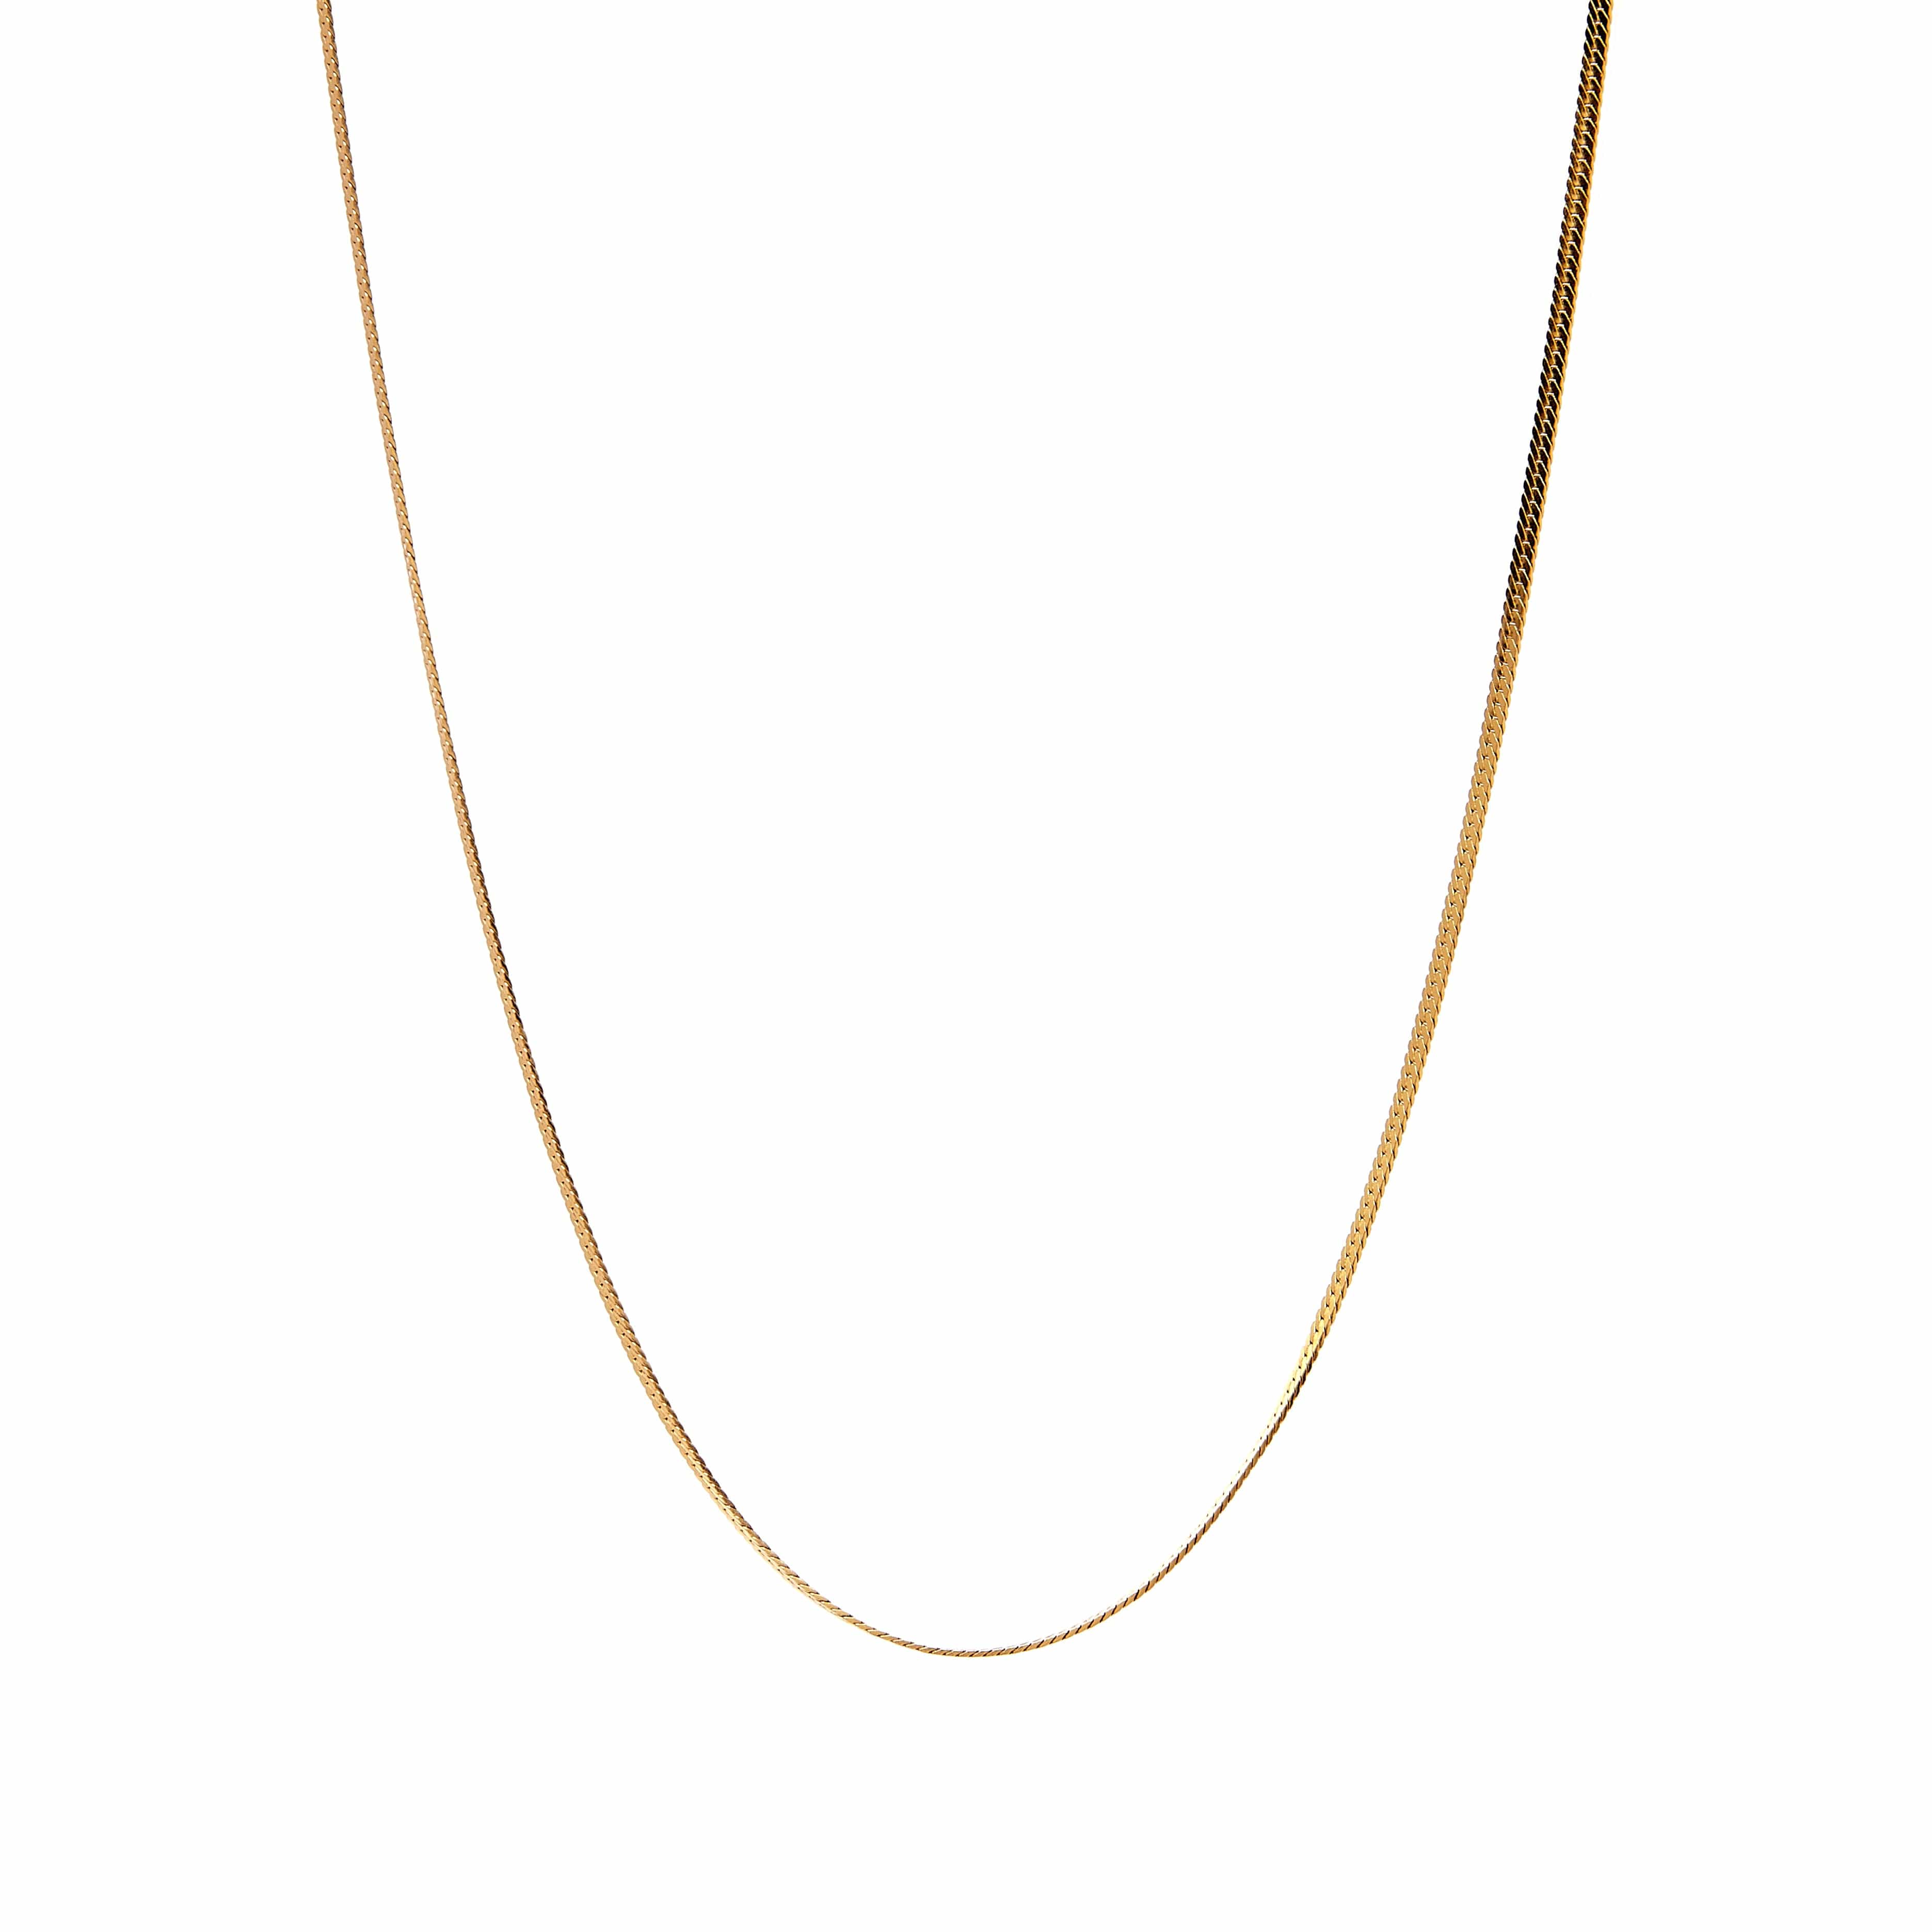 Emery Chain Necklace - Recycled Silver Gold Plated